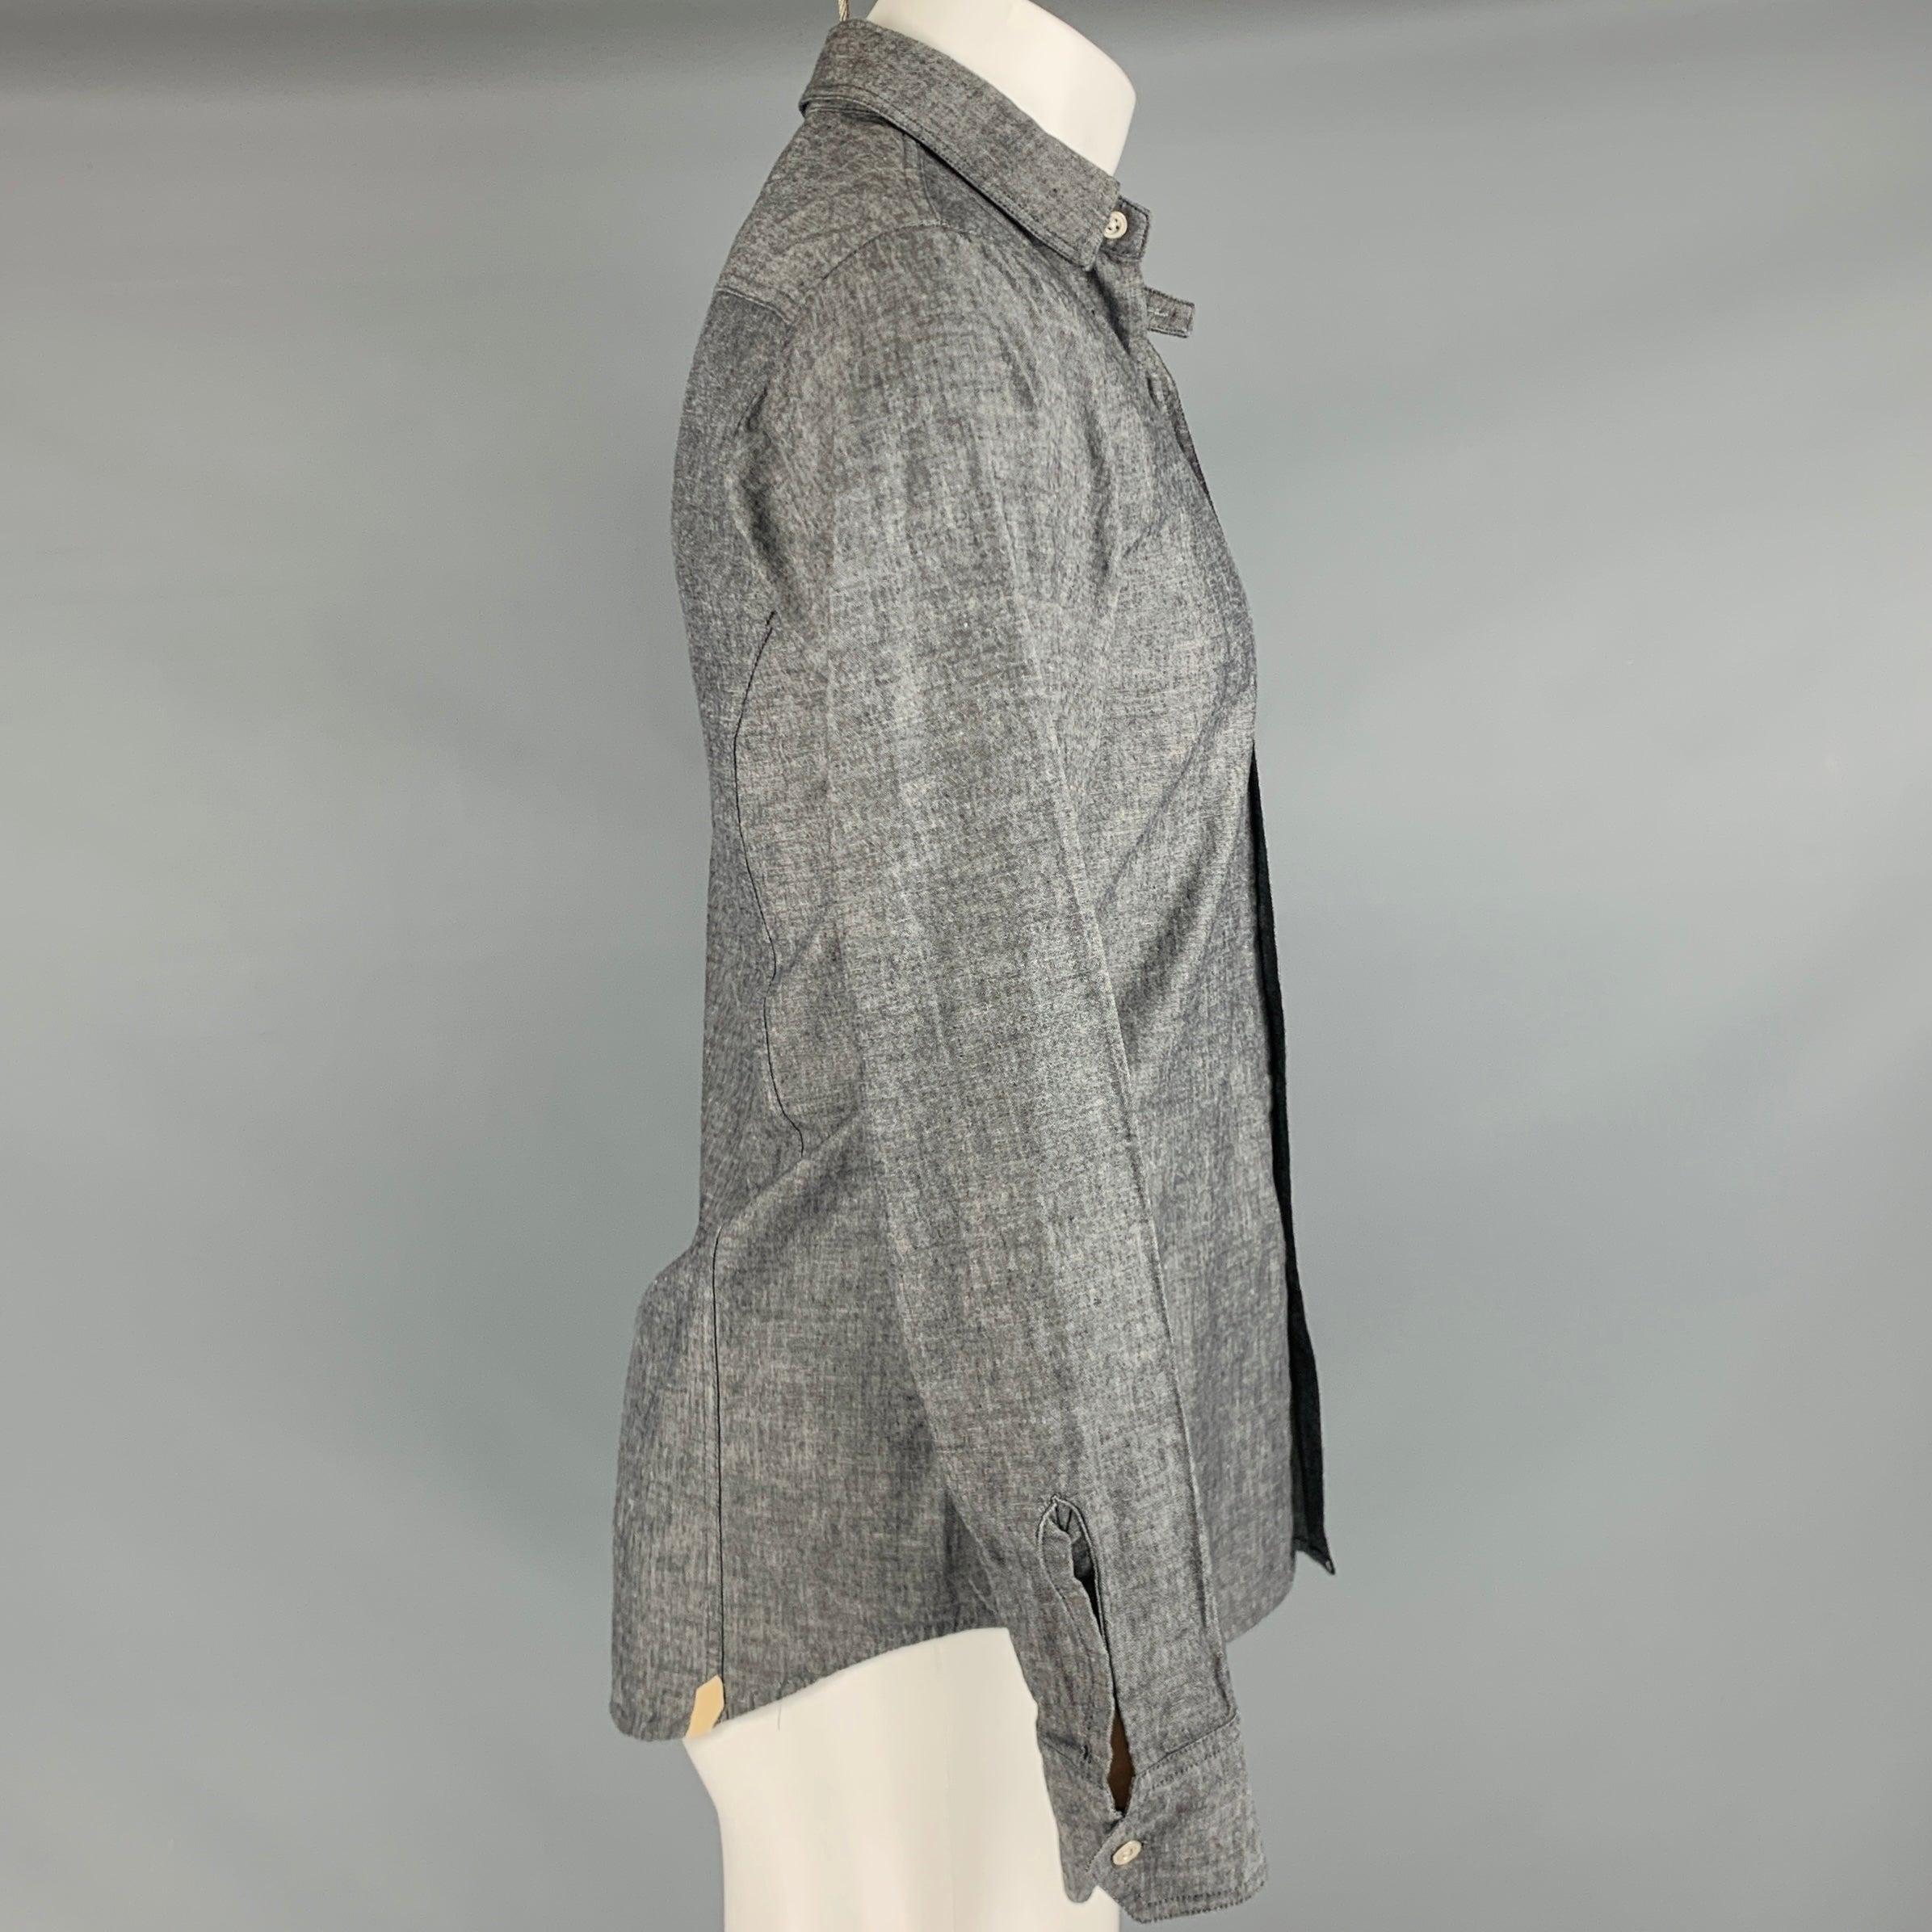 RAG & BONE long sleeve shirt
in a
grey cotton fabric featuring one pocket, spread collar, and button closure. Made in USA.Excellent Pre-Owned Condition. 

Marked:   S 

Measurements: 
 
Shoulder: 16 inches Chest: 38 inches Sleeve: 25 inches Length: